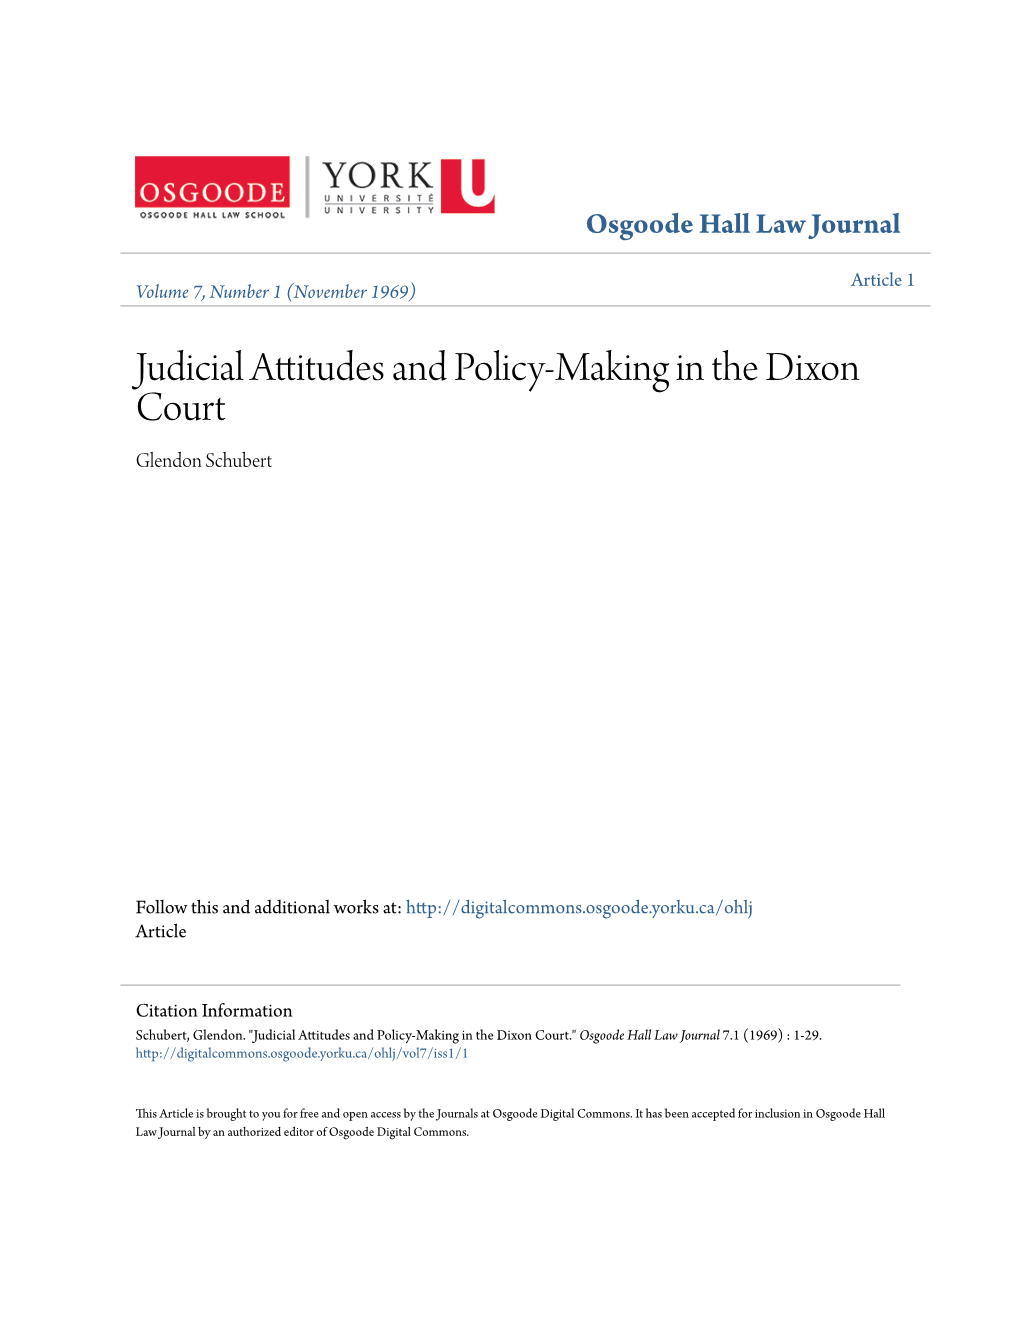 Judicial Attitudes and Policy-Making in the Dixon Court Glendon Schubert